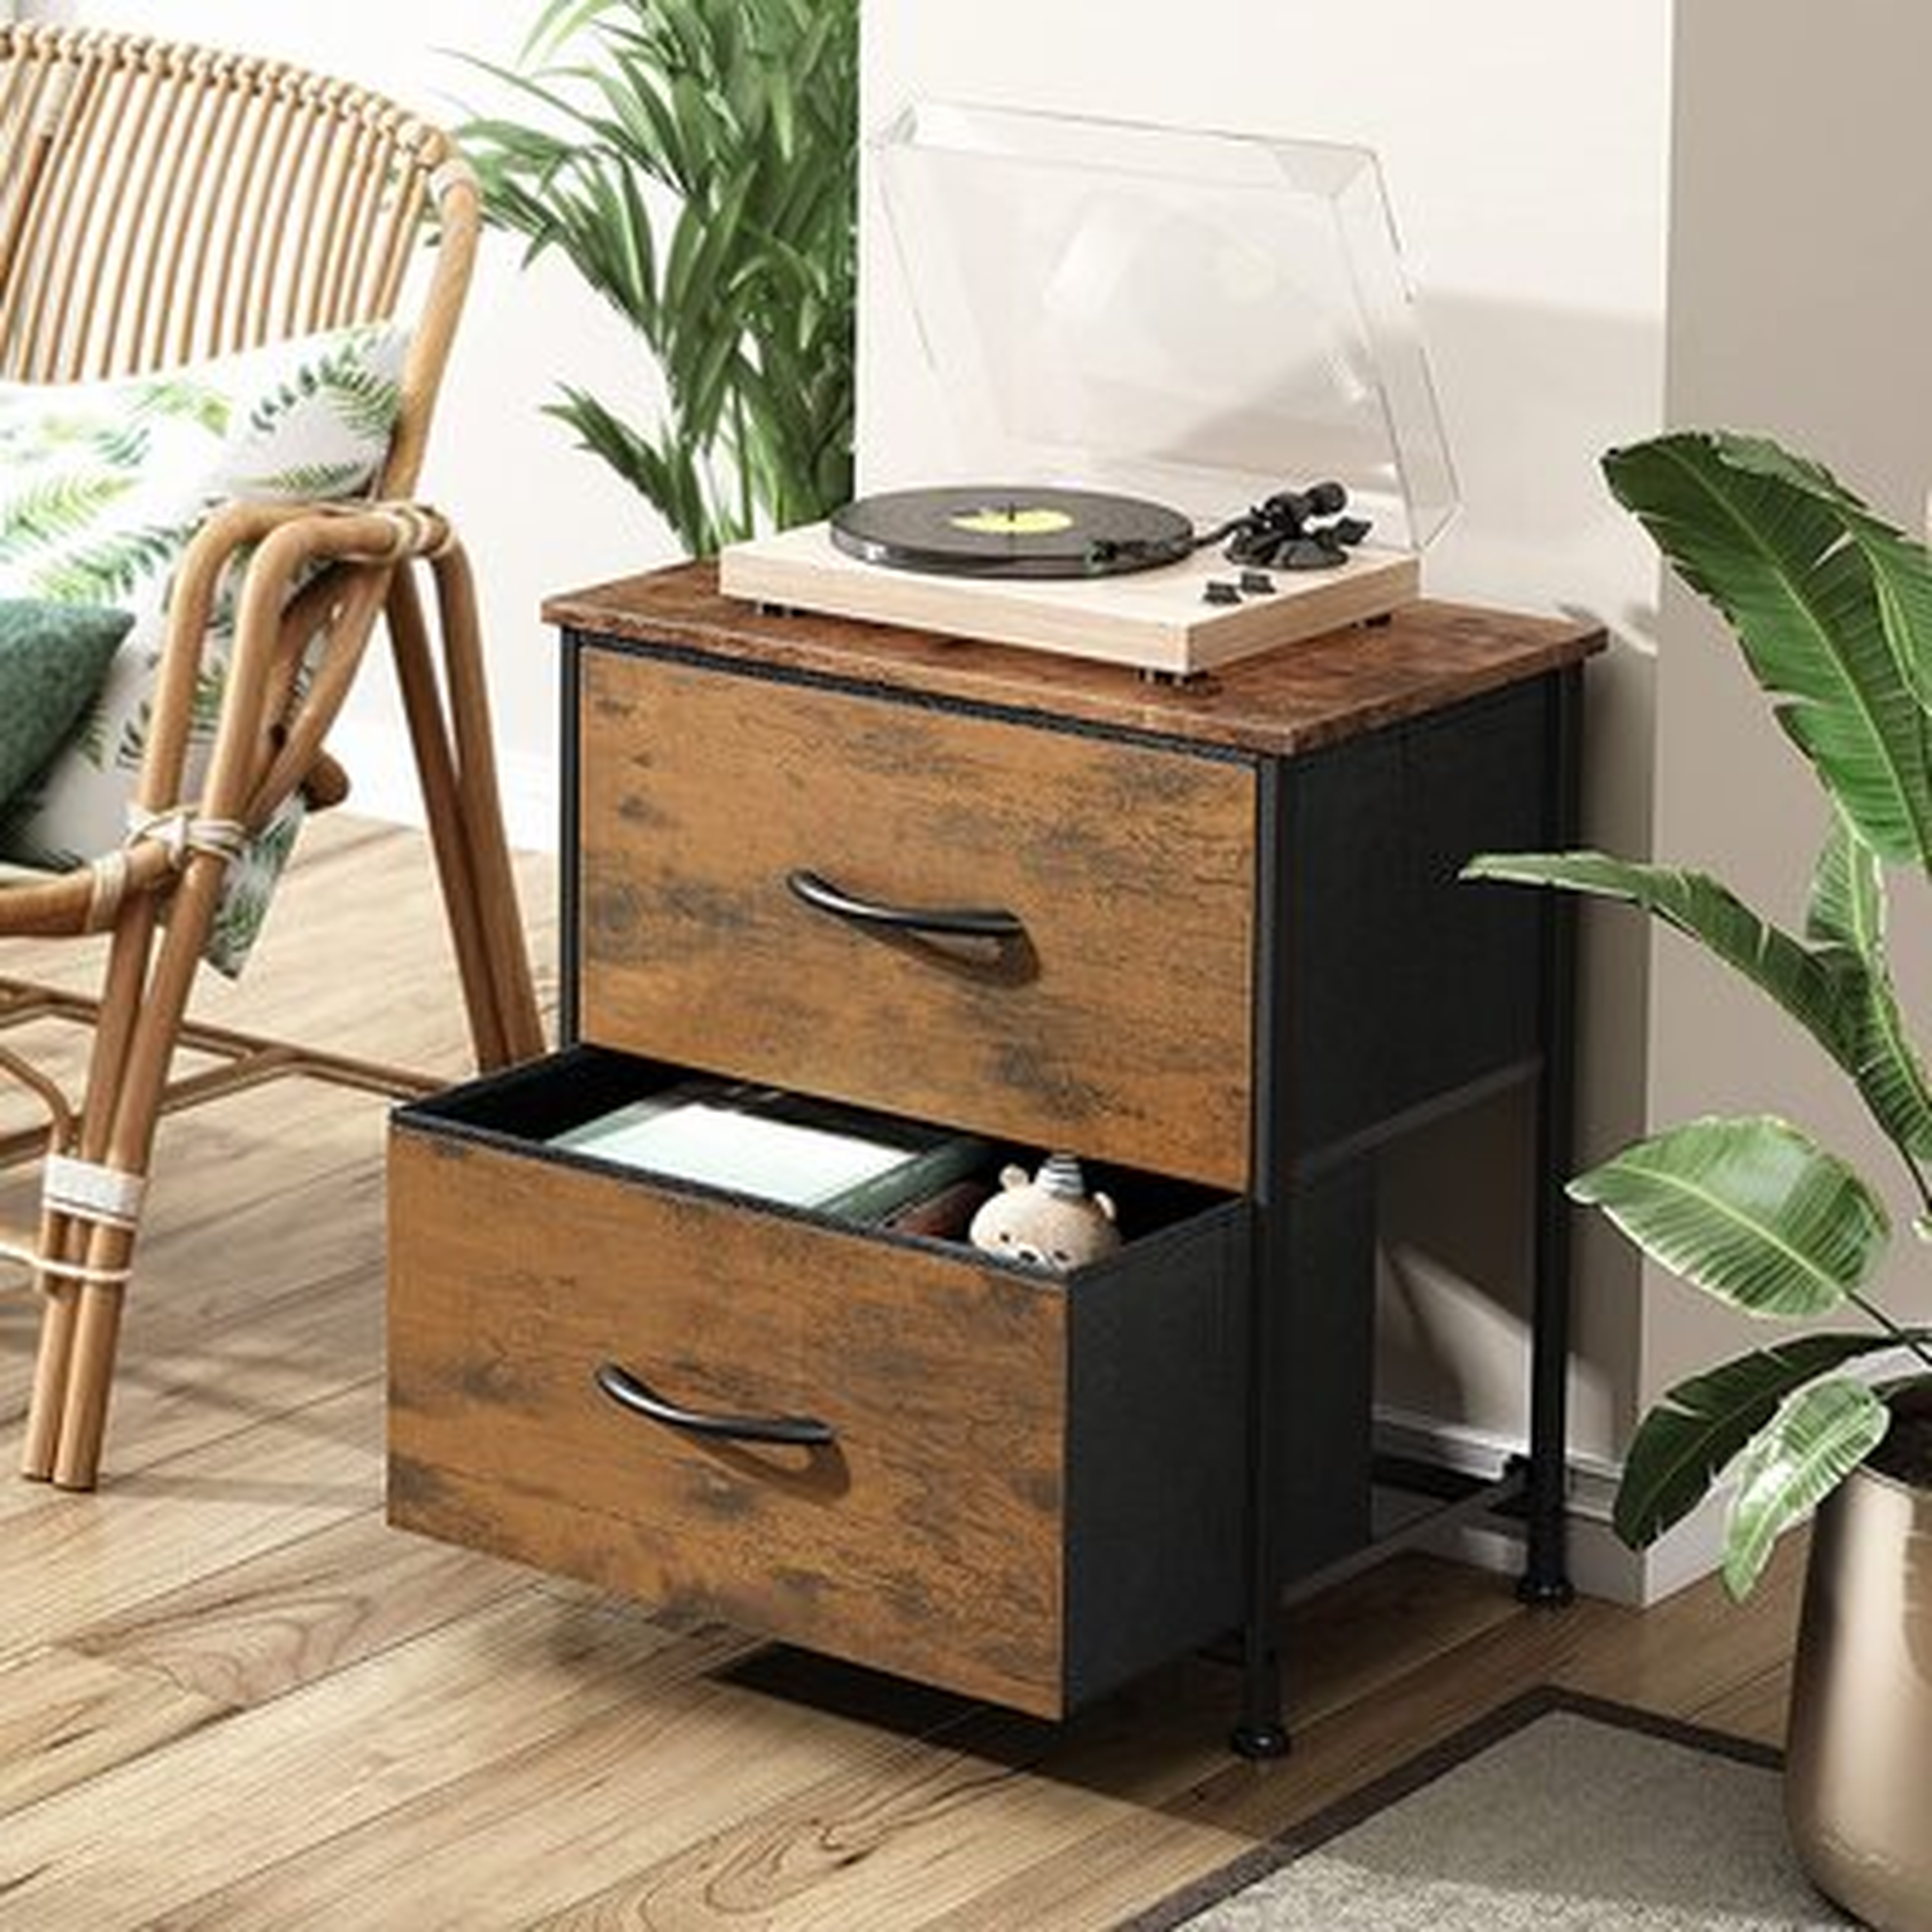 Nightstand, 2 Drawer Dresser For Bedroom, Small Dresser With 2 Drawers, Bedside Furniture, Night Stand, End Table With Fabric Bins For Bedroom, Living Room, Dorm, Rustic Brown Wood Grain Print - Wayfair